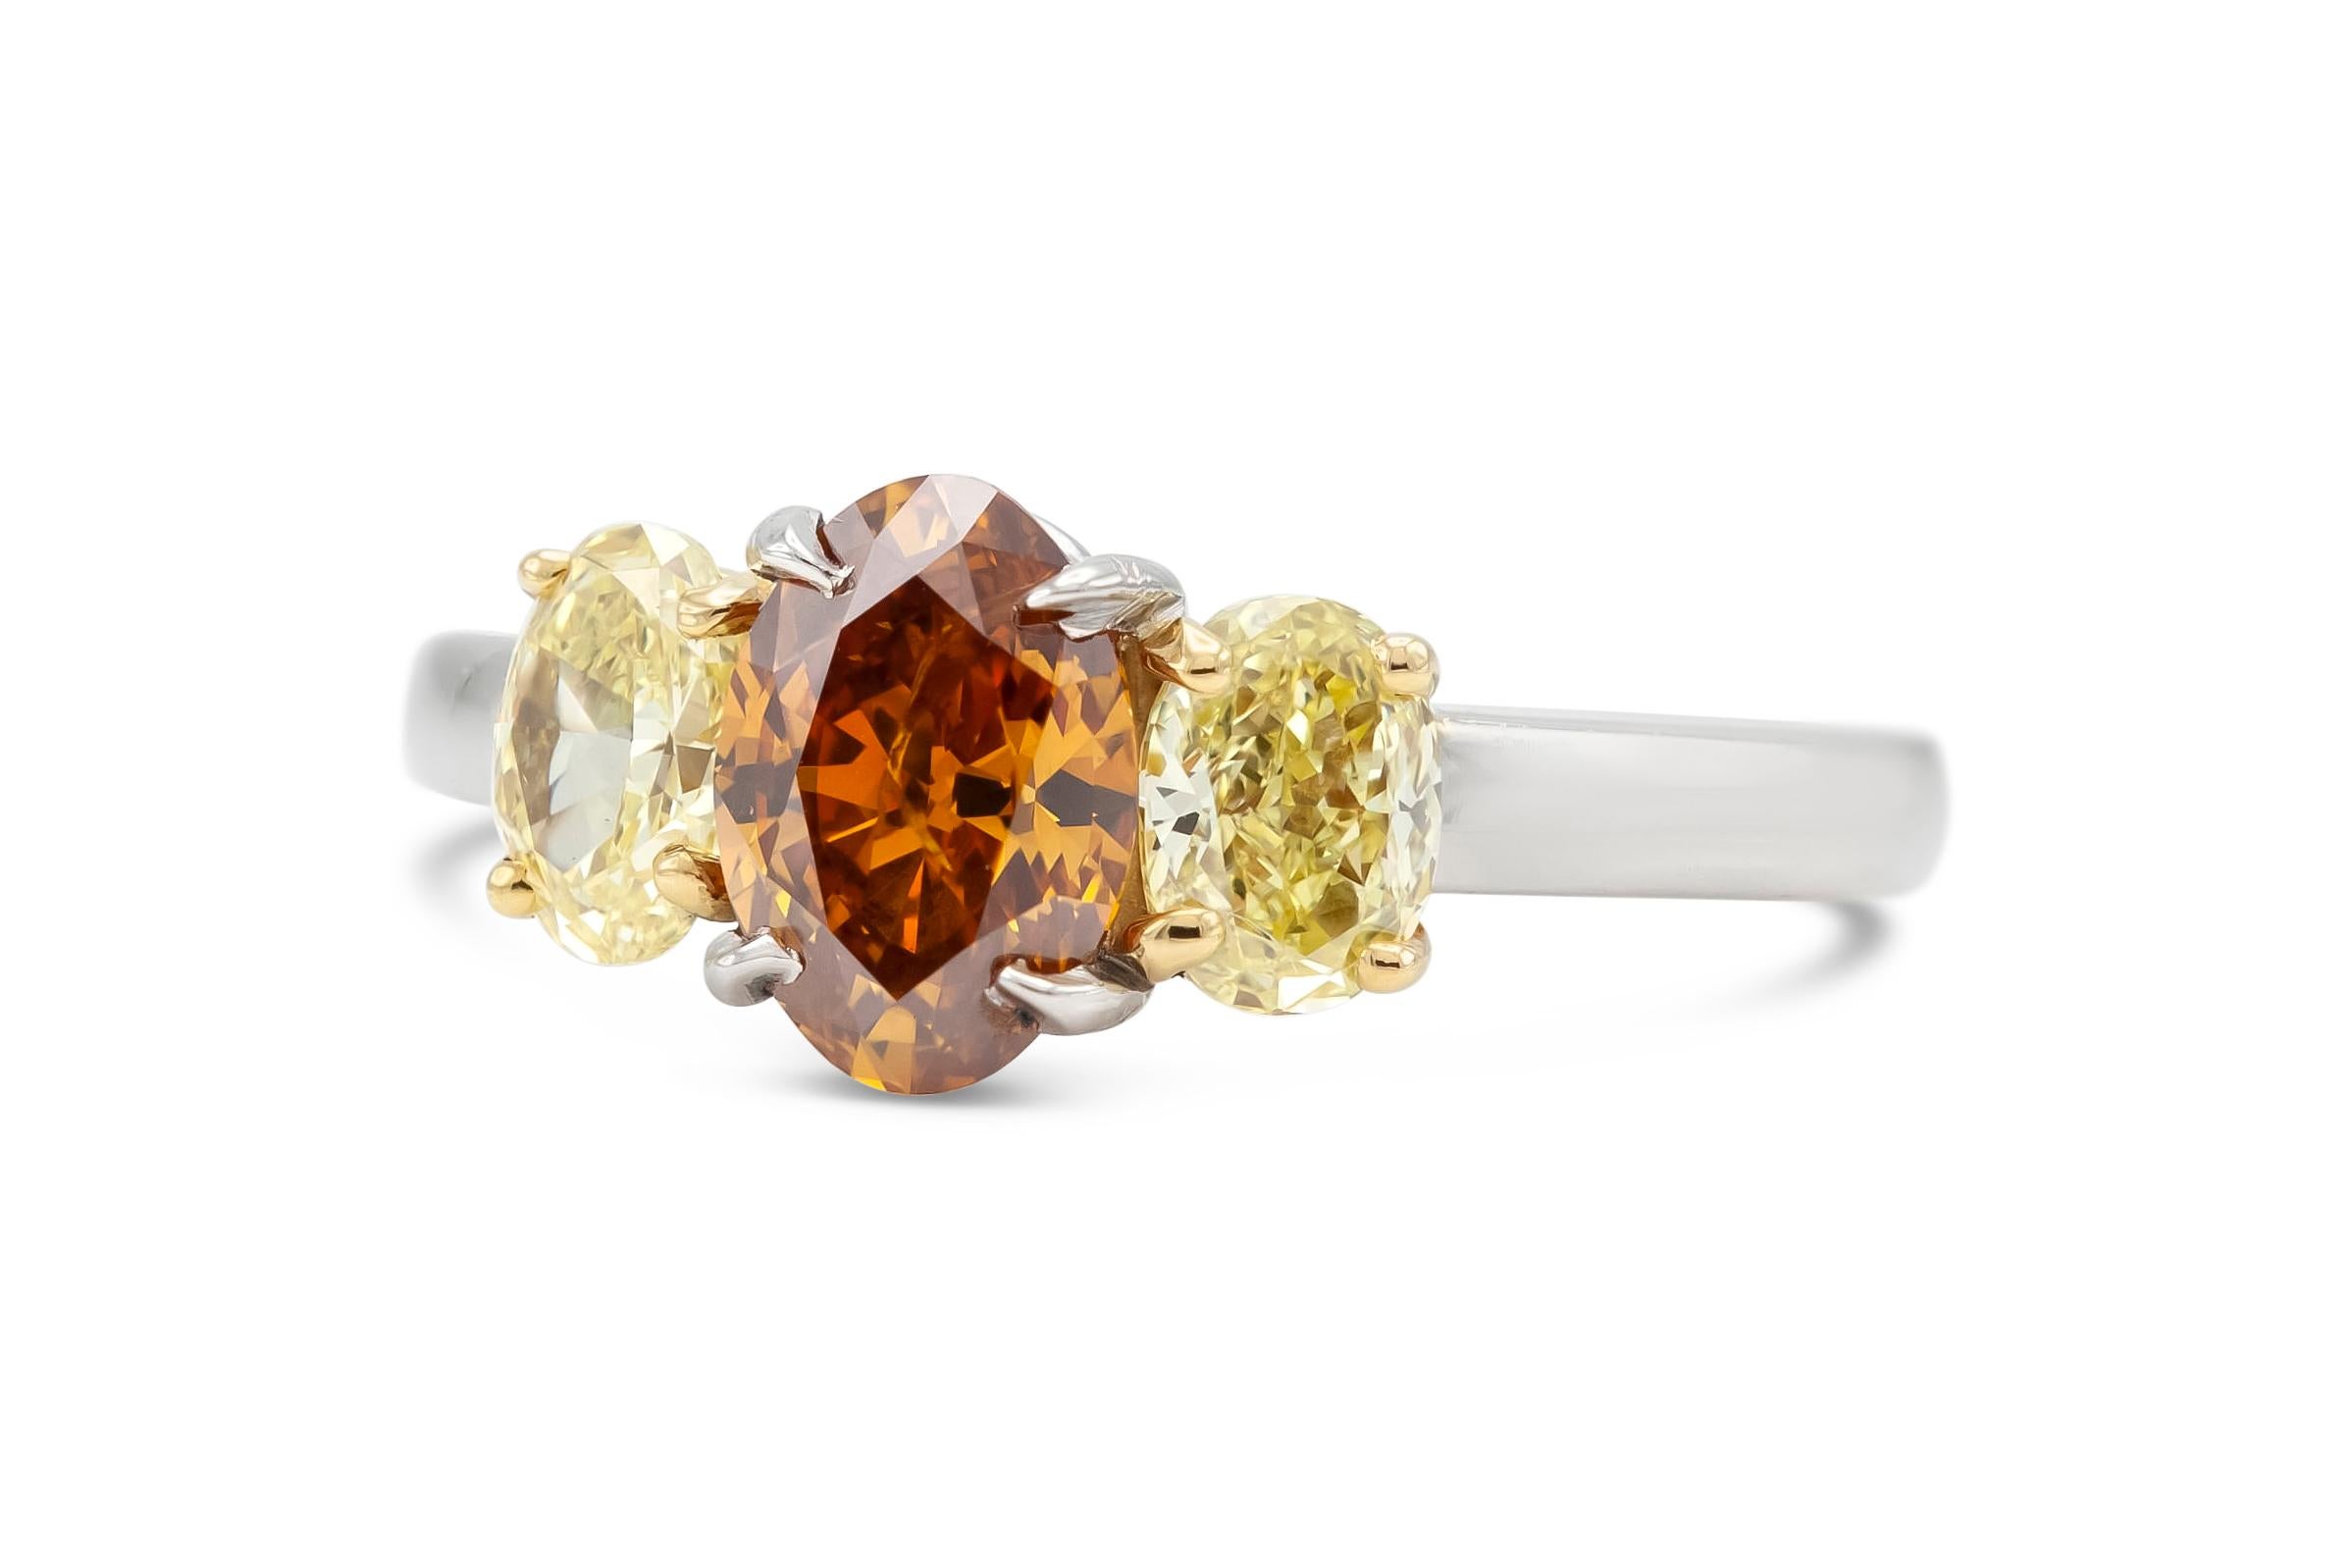 Finely crafted in platinum with a center GIA certified 1.12 carat Fancy Deep Brownish Yellowish Orange diamond.
GIA certificate number: 2201779209
The ring features two yellow diamonds weighing approximately a total of 0.60 carats.